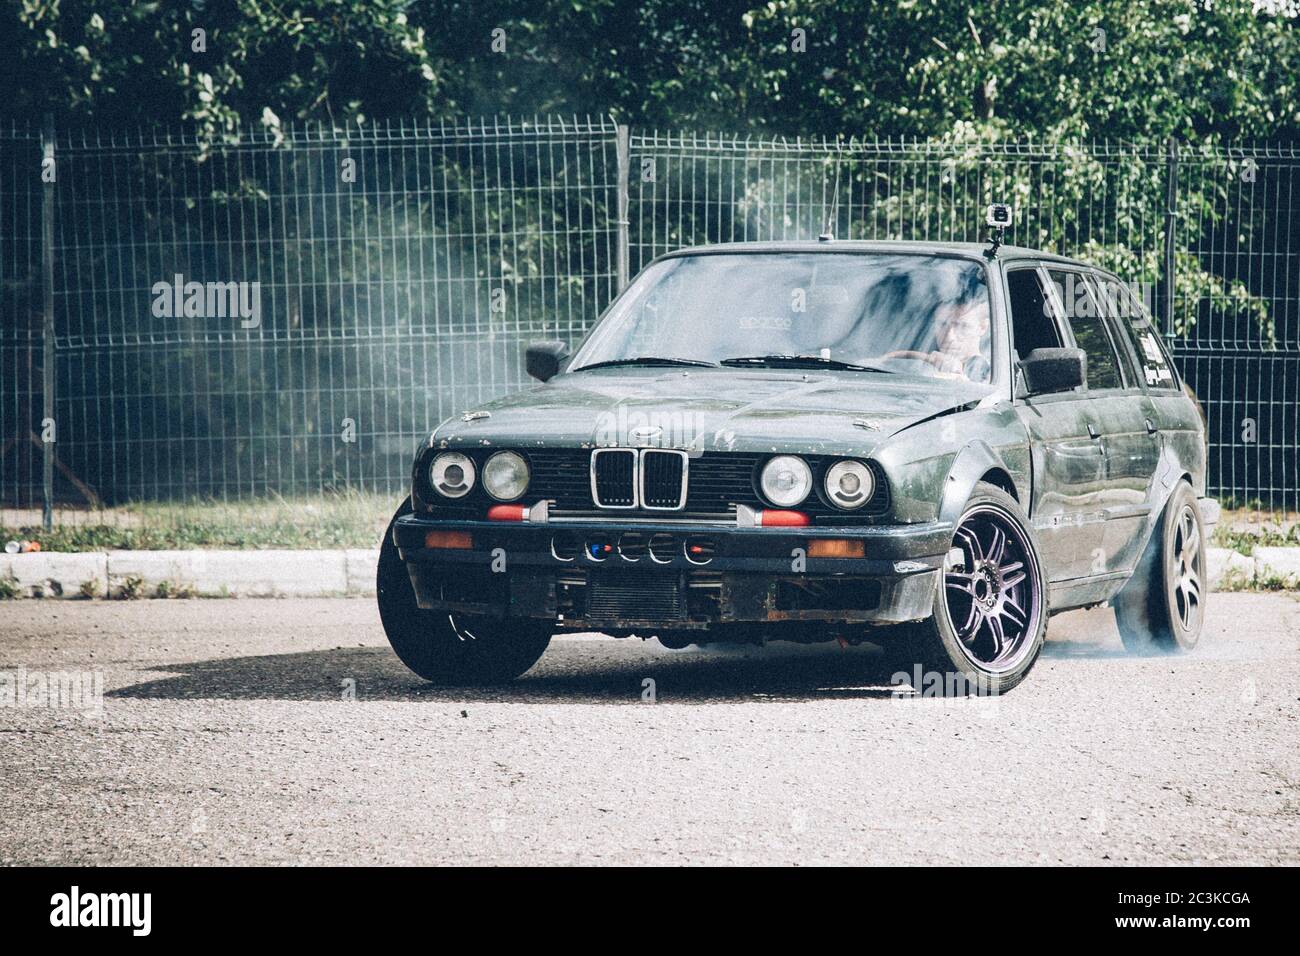 Moscow. Russia - July 06, 2019: A dark BMW car drifts in the parking lot. A lot of smoke, a burnout. Illegal drift. Law violation. Stock Photo